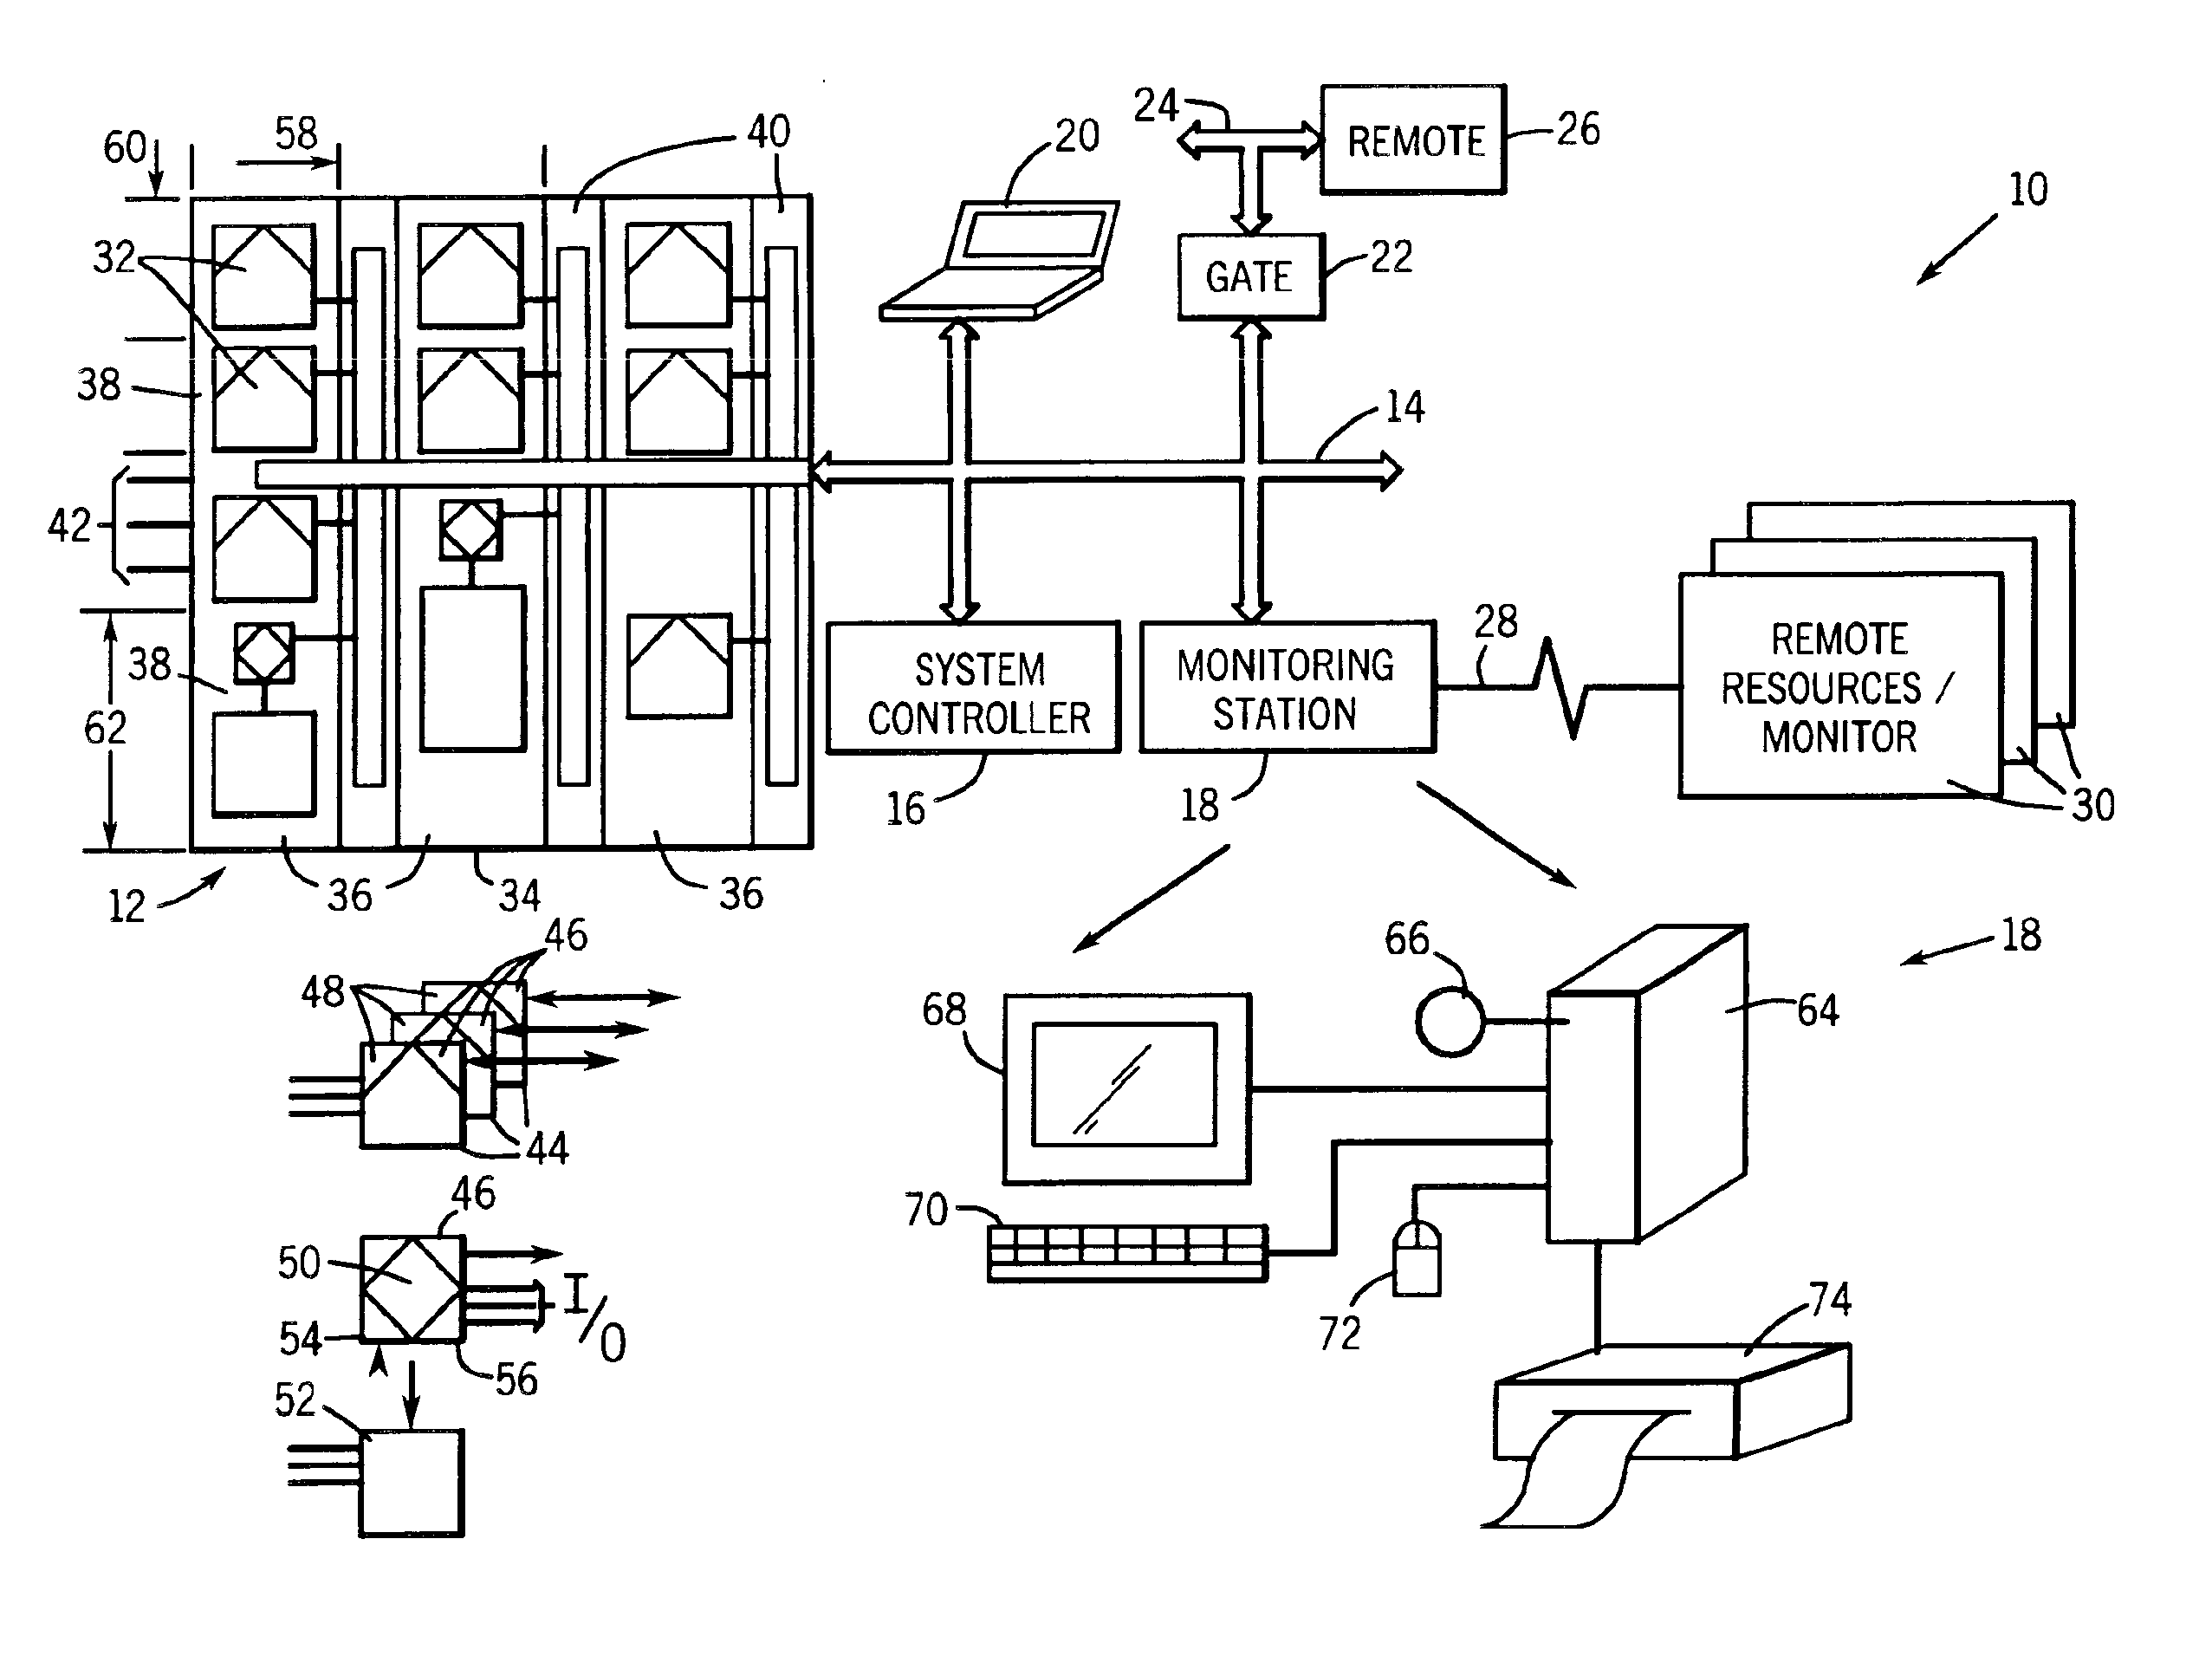 Electrical control system configuration method and apparatus